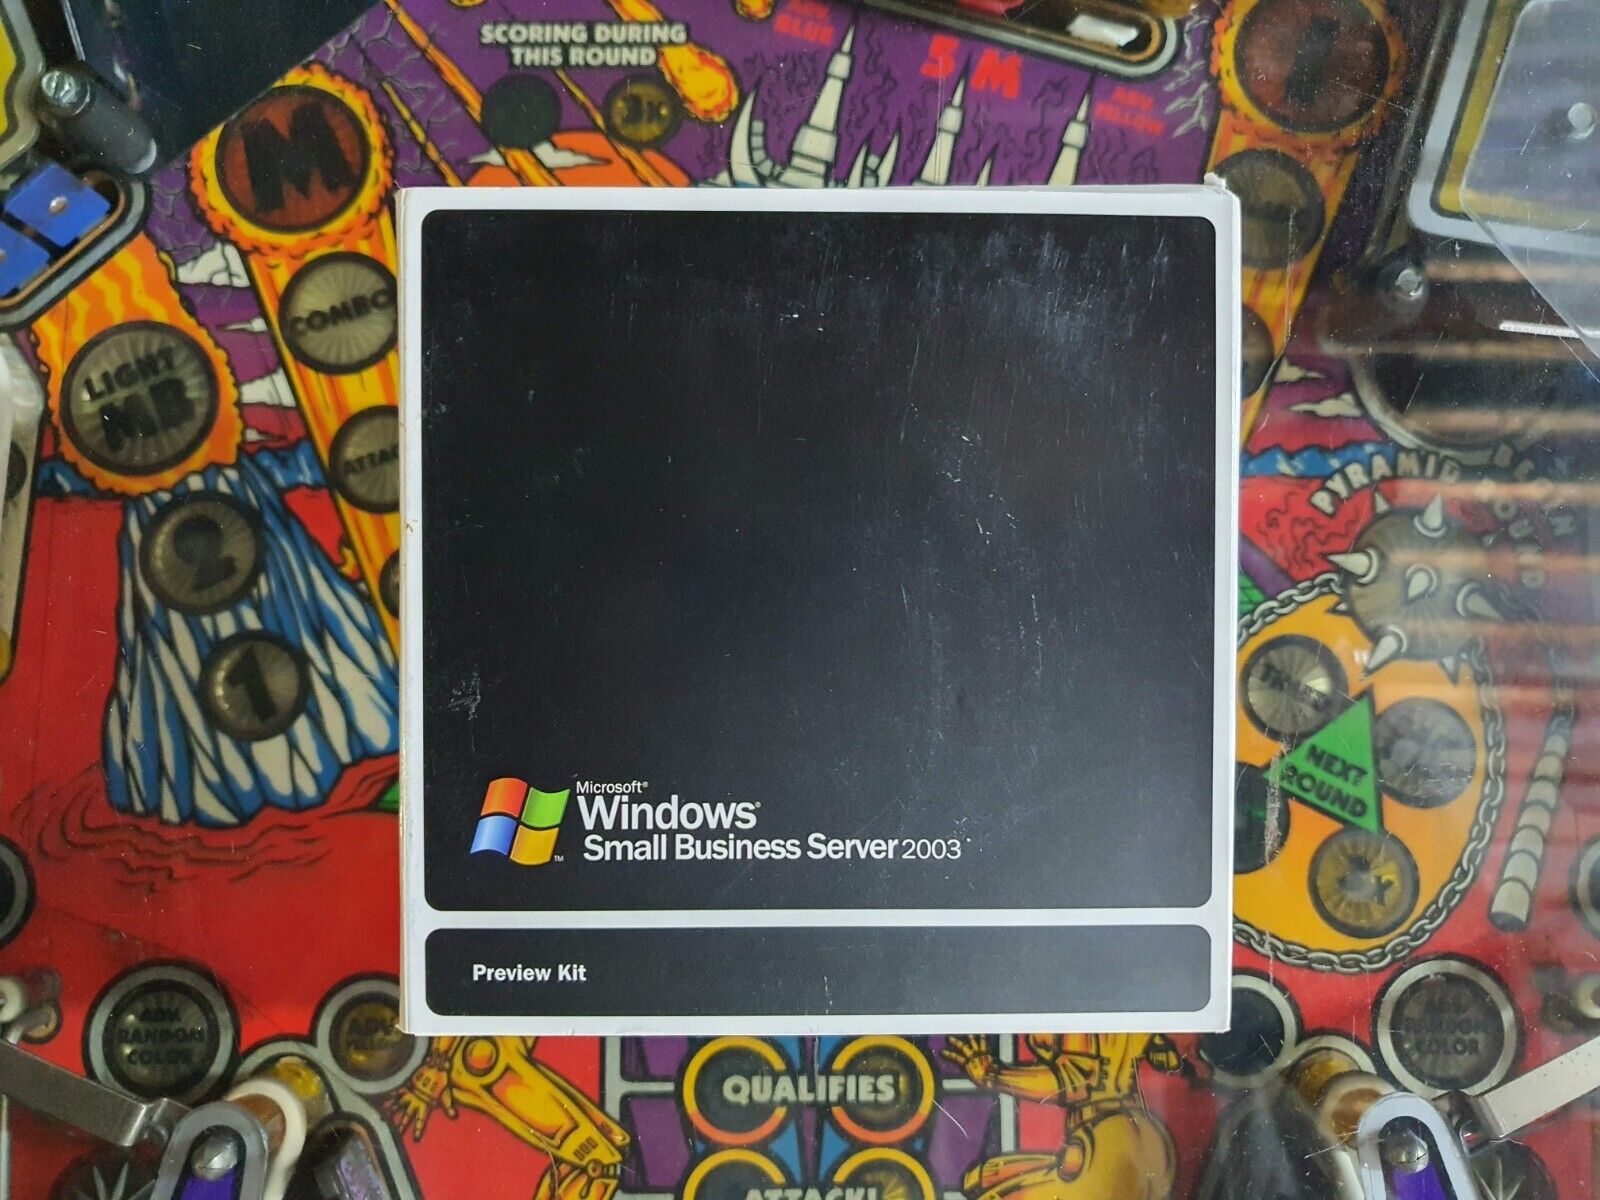 Microsoft Windows Small Business Server 2003 Preview Kit - Retro PC Collectable